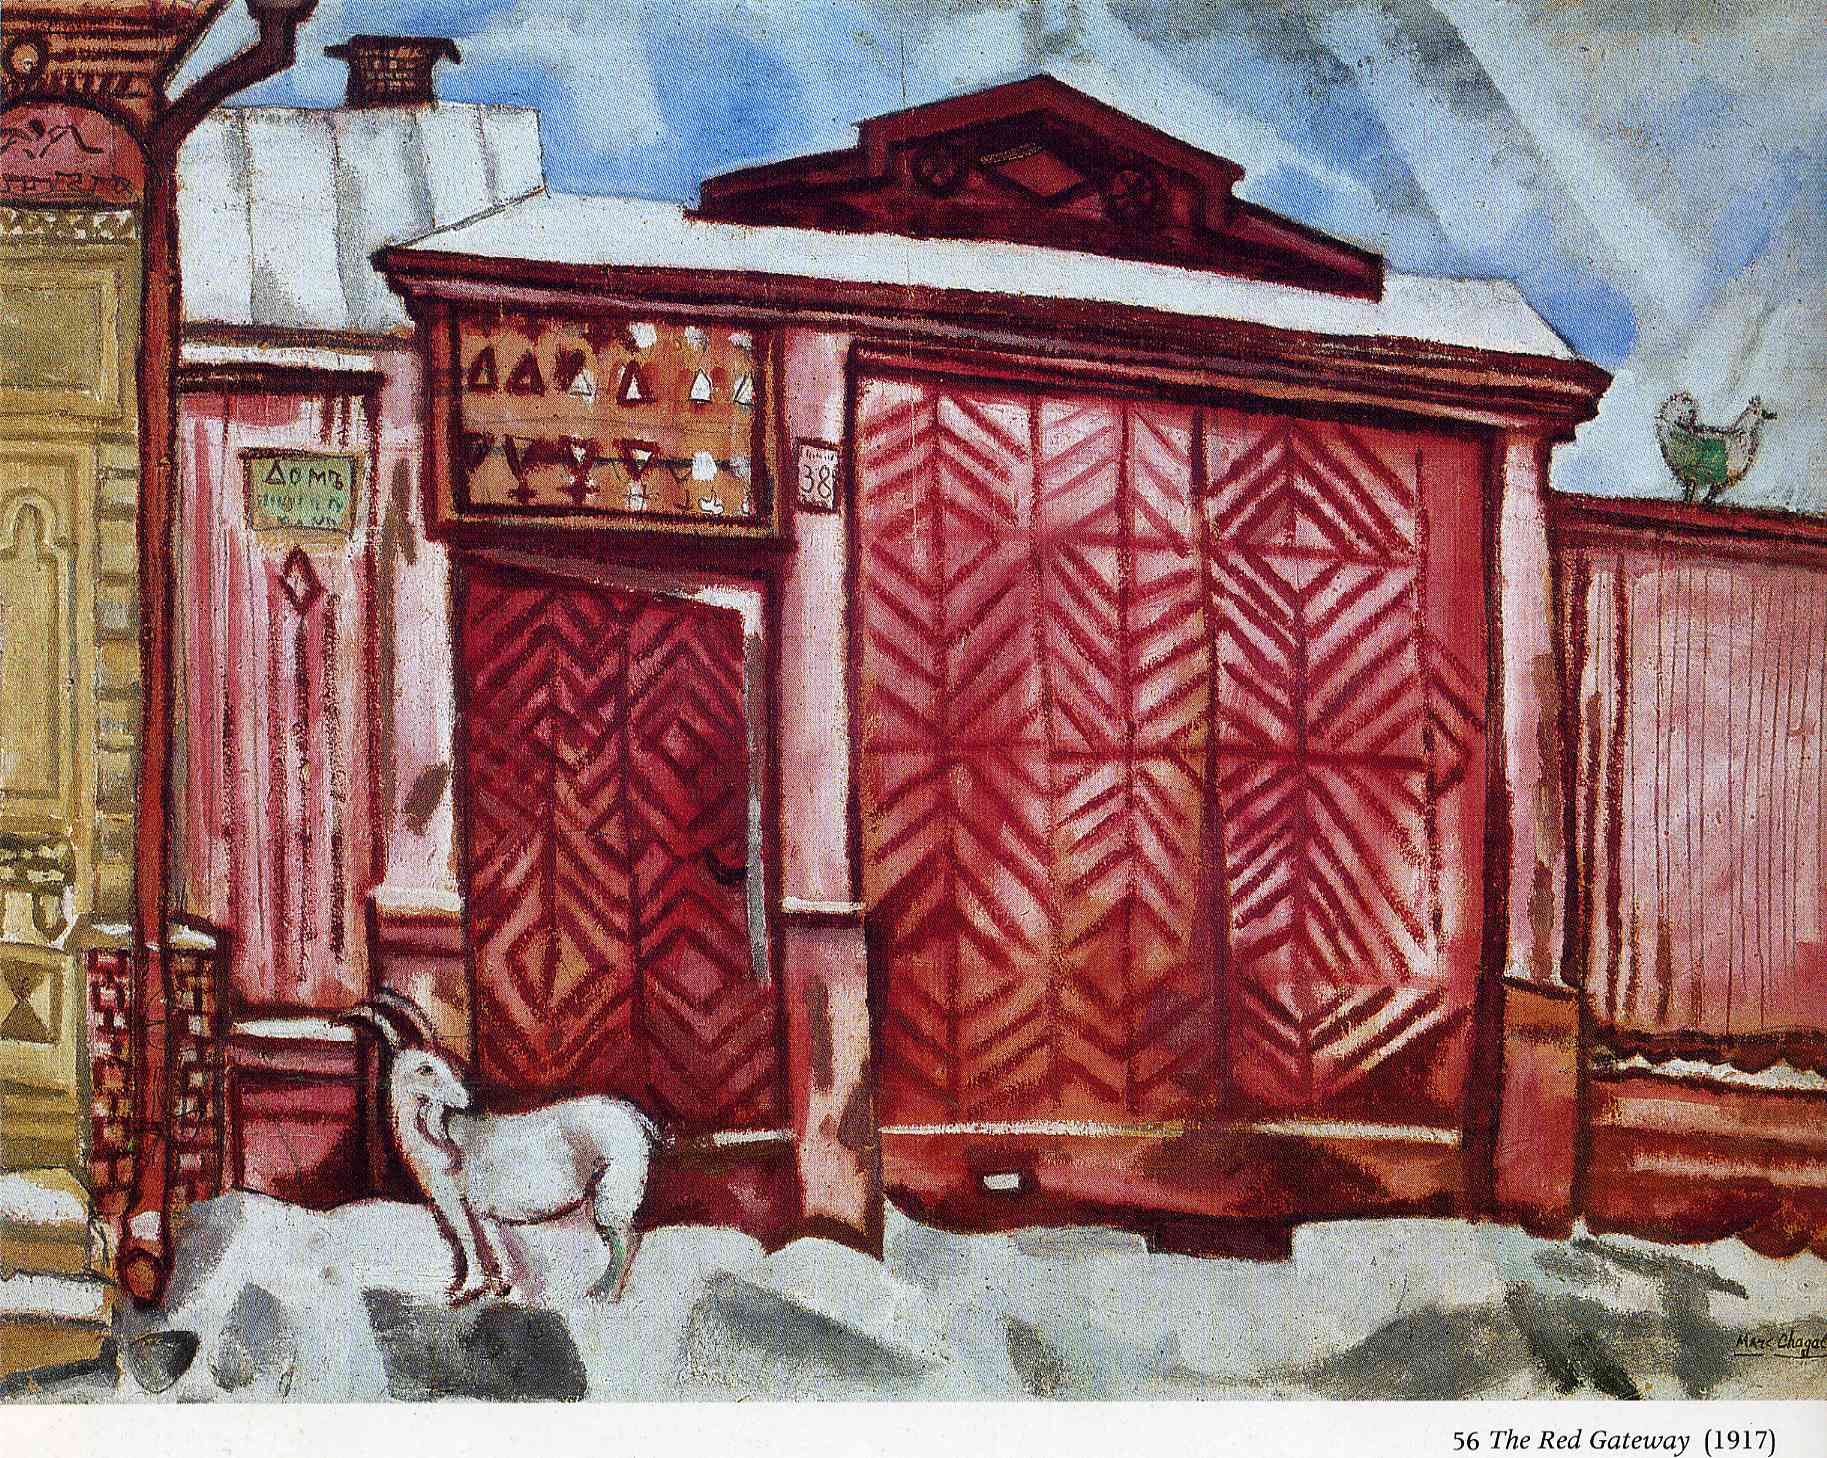 The red gateway (1917).